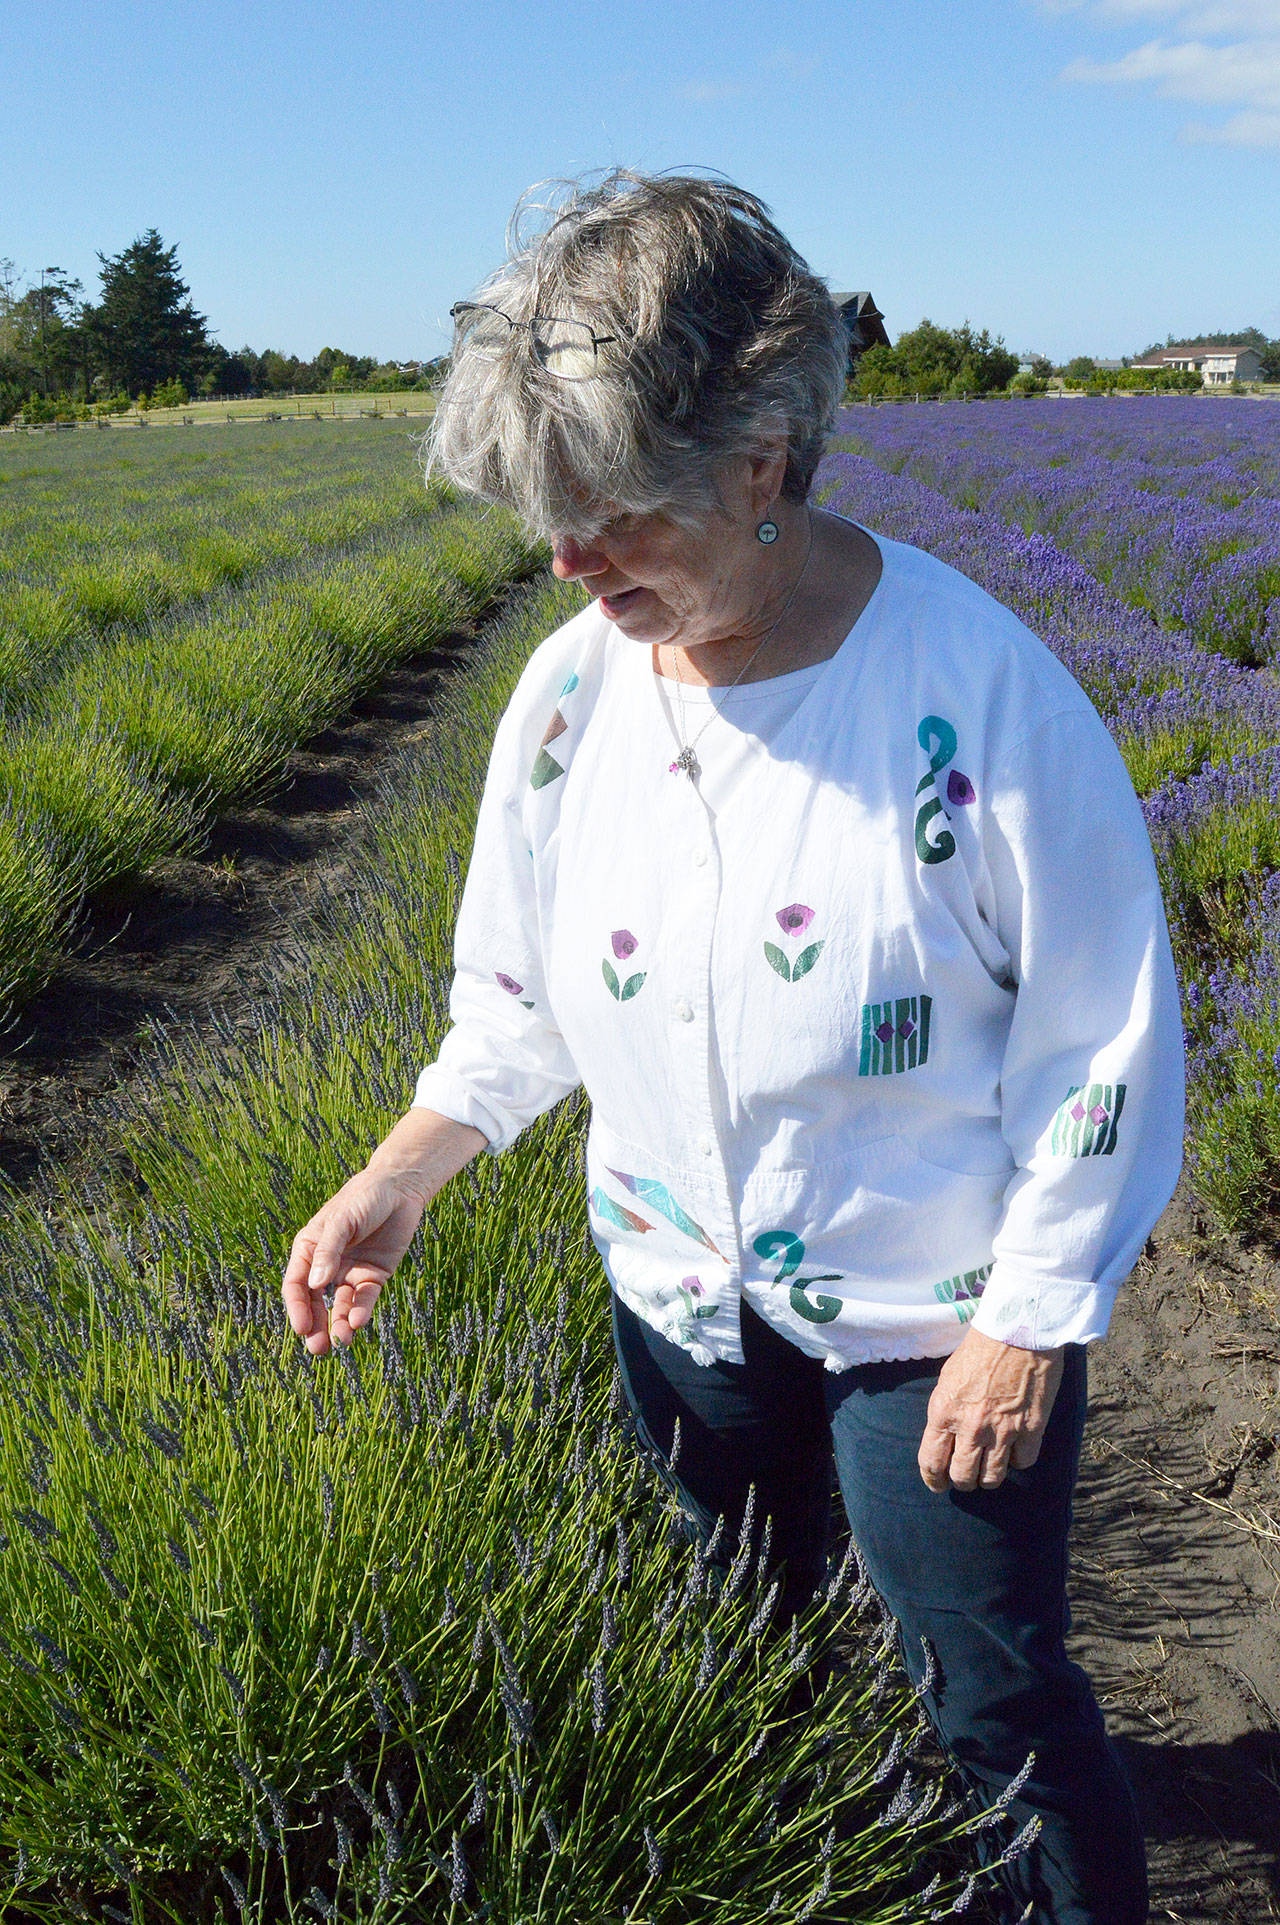 Sarah Richards examines the different rows of lavender at her farm, explaining how each variety blooms at a different pace. She anticipates lavender blooming throughout her new summer concert series. Photo by Megan Hansen/Whidbey News-Times